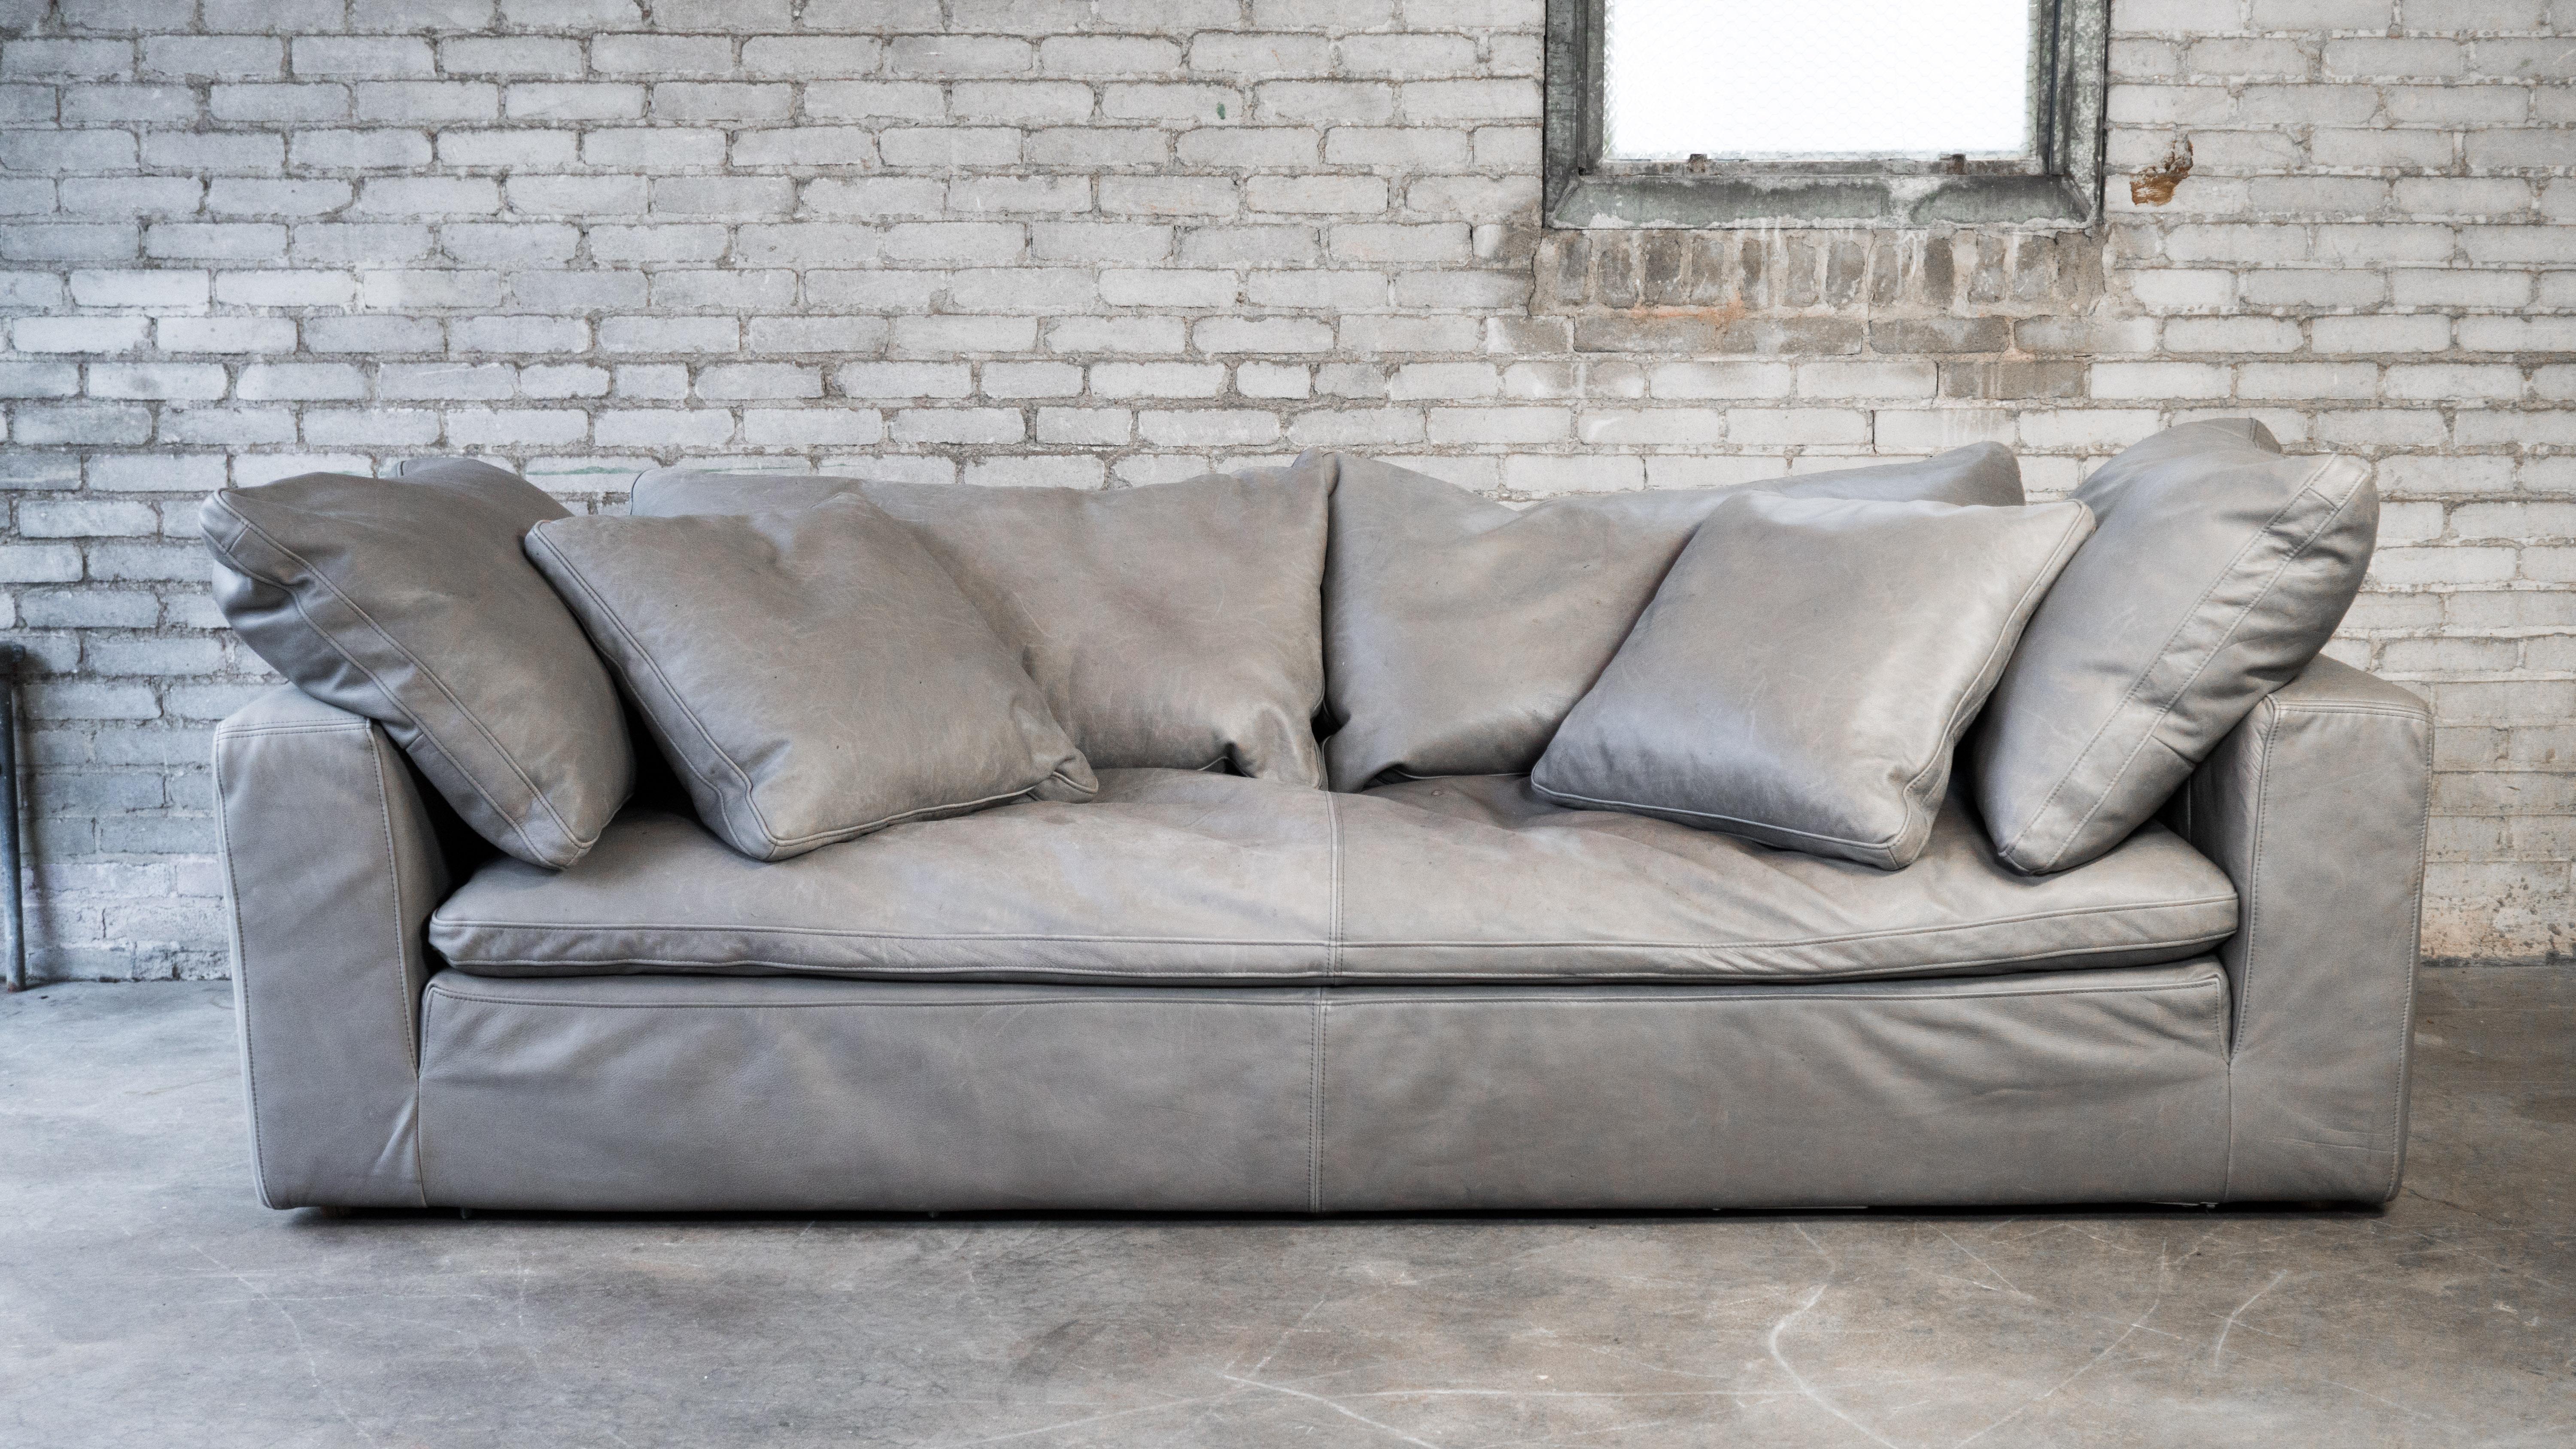 Restoration Hardware Leather Cloud bench sofa. 8 feet long, circa 2018. Lovely soft and supple light gray leather and 100% feather down filled cushions and pillows, makes the seating experience utterly comfortable and luxurious. Designed by Timothy